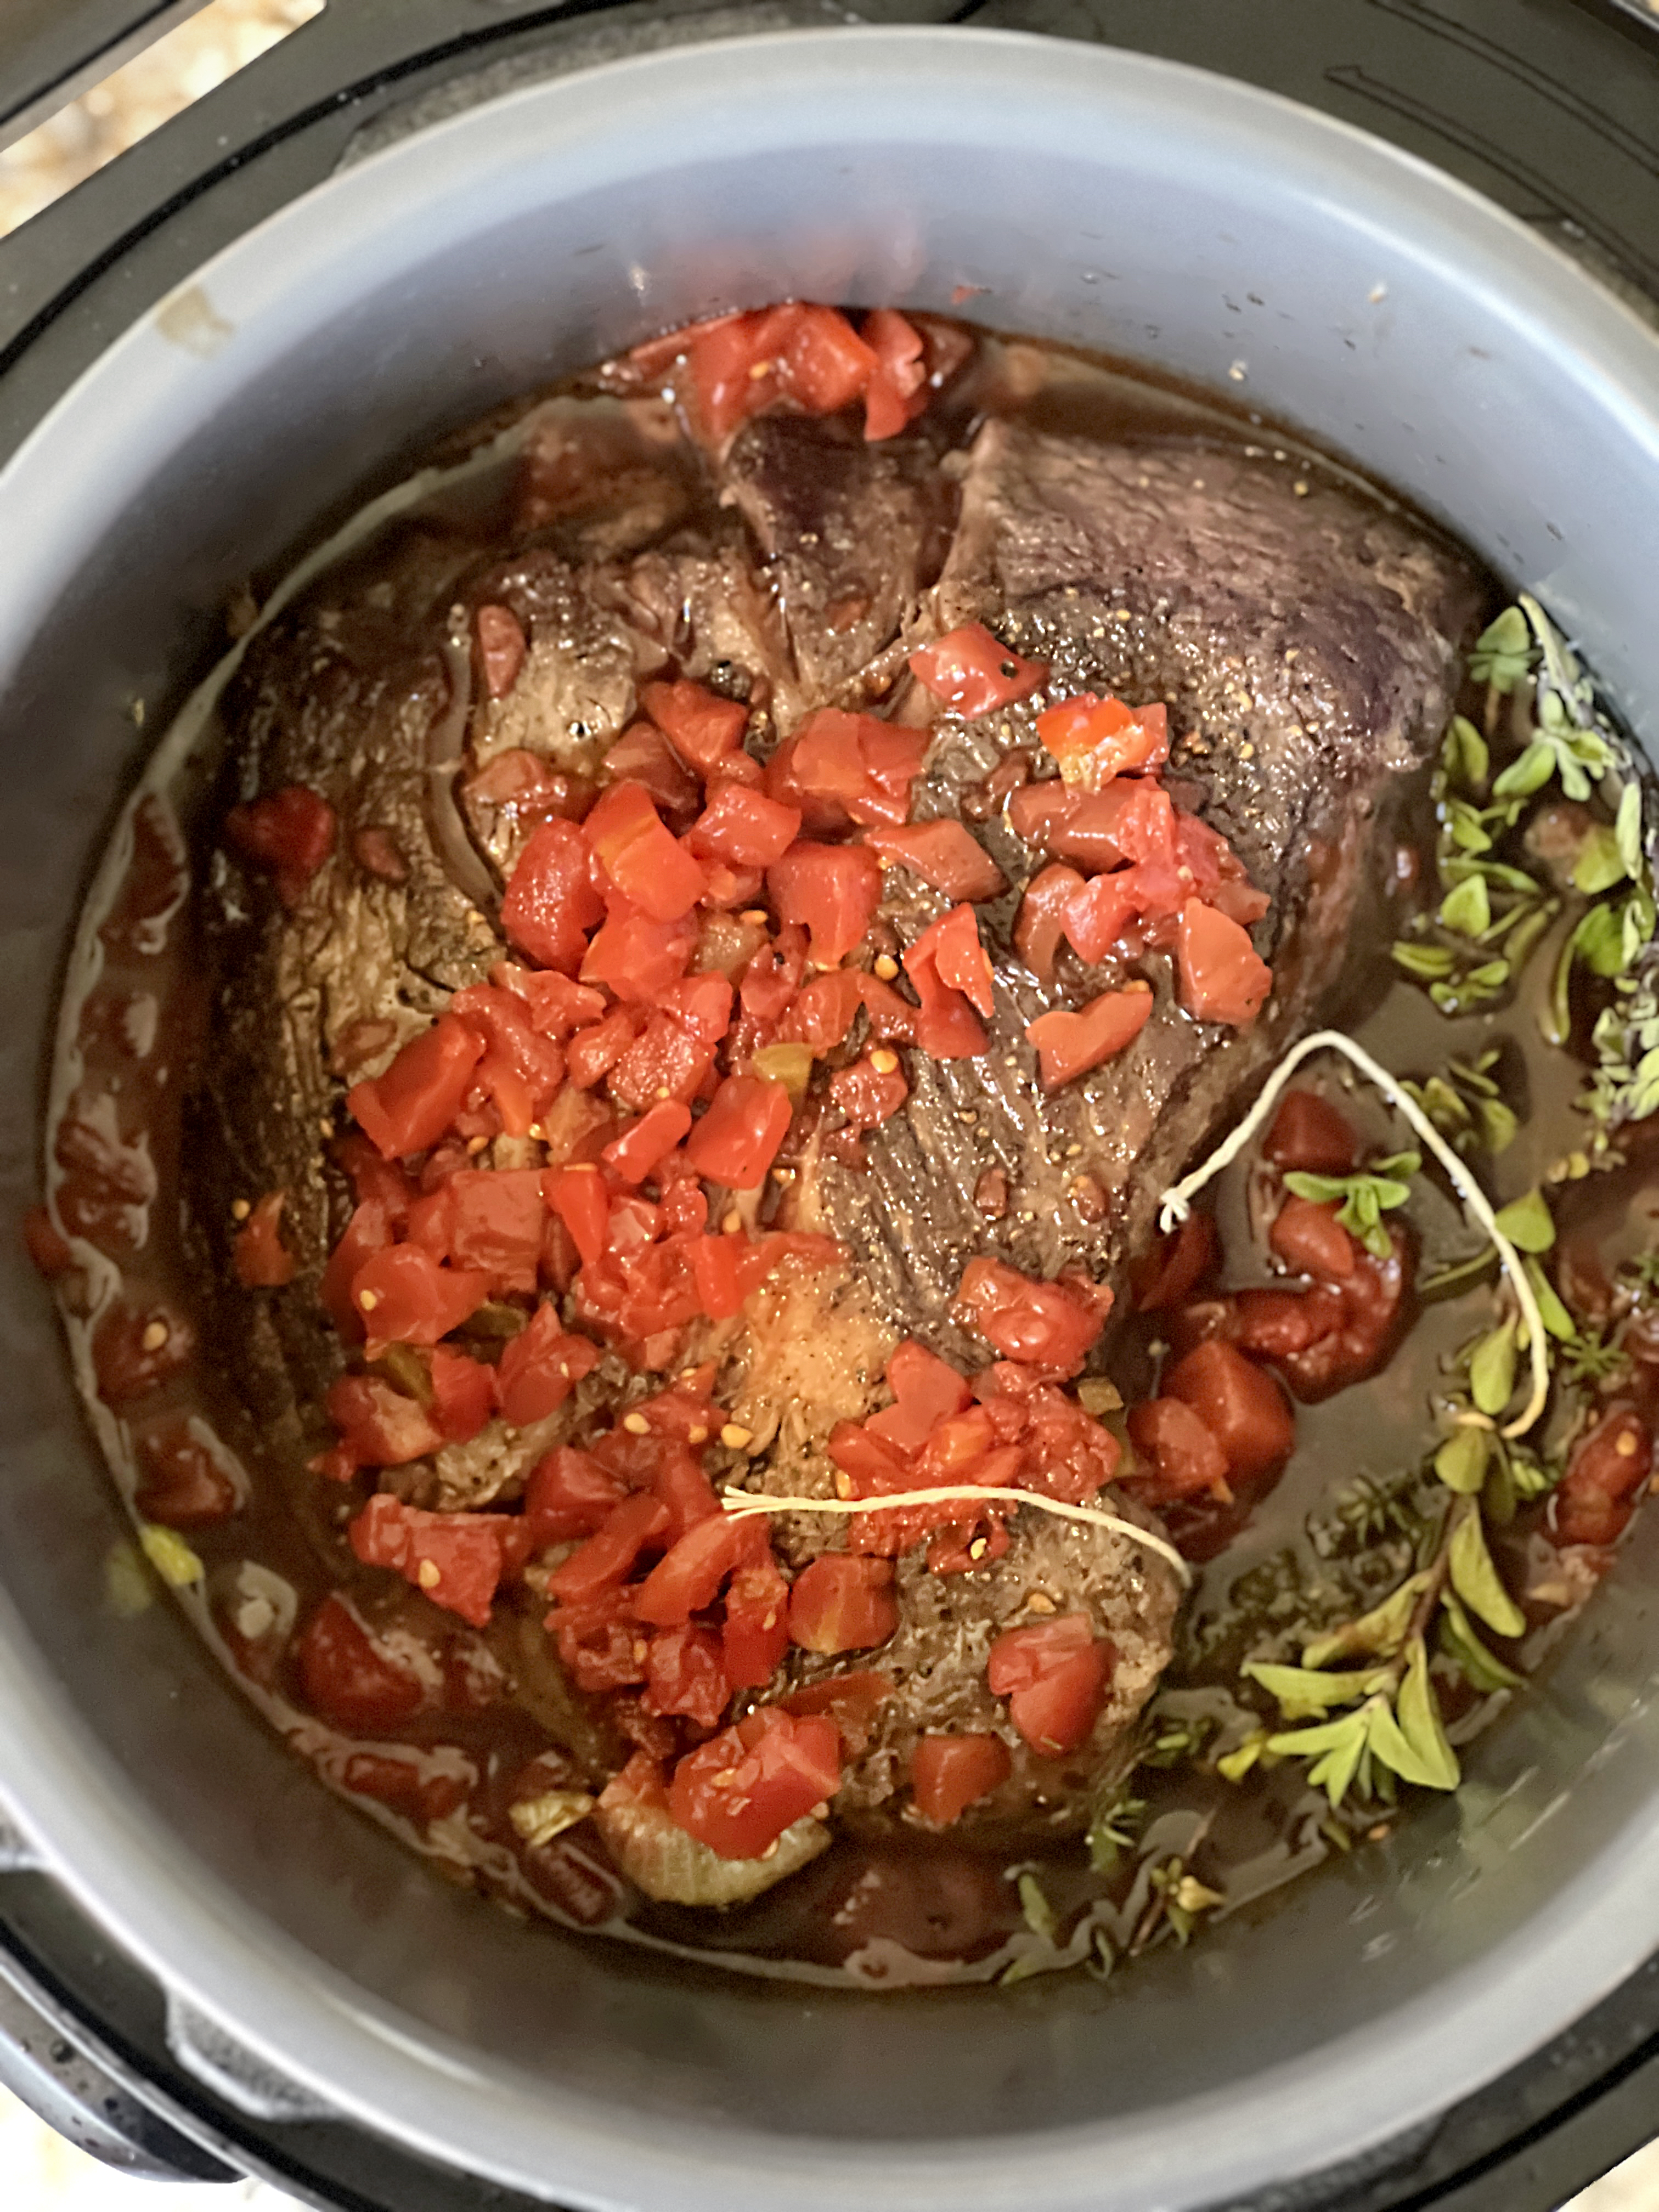 Top down view of pomegranate molasses brisket in the Instant Pot.